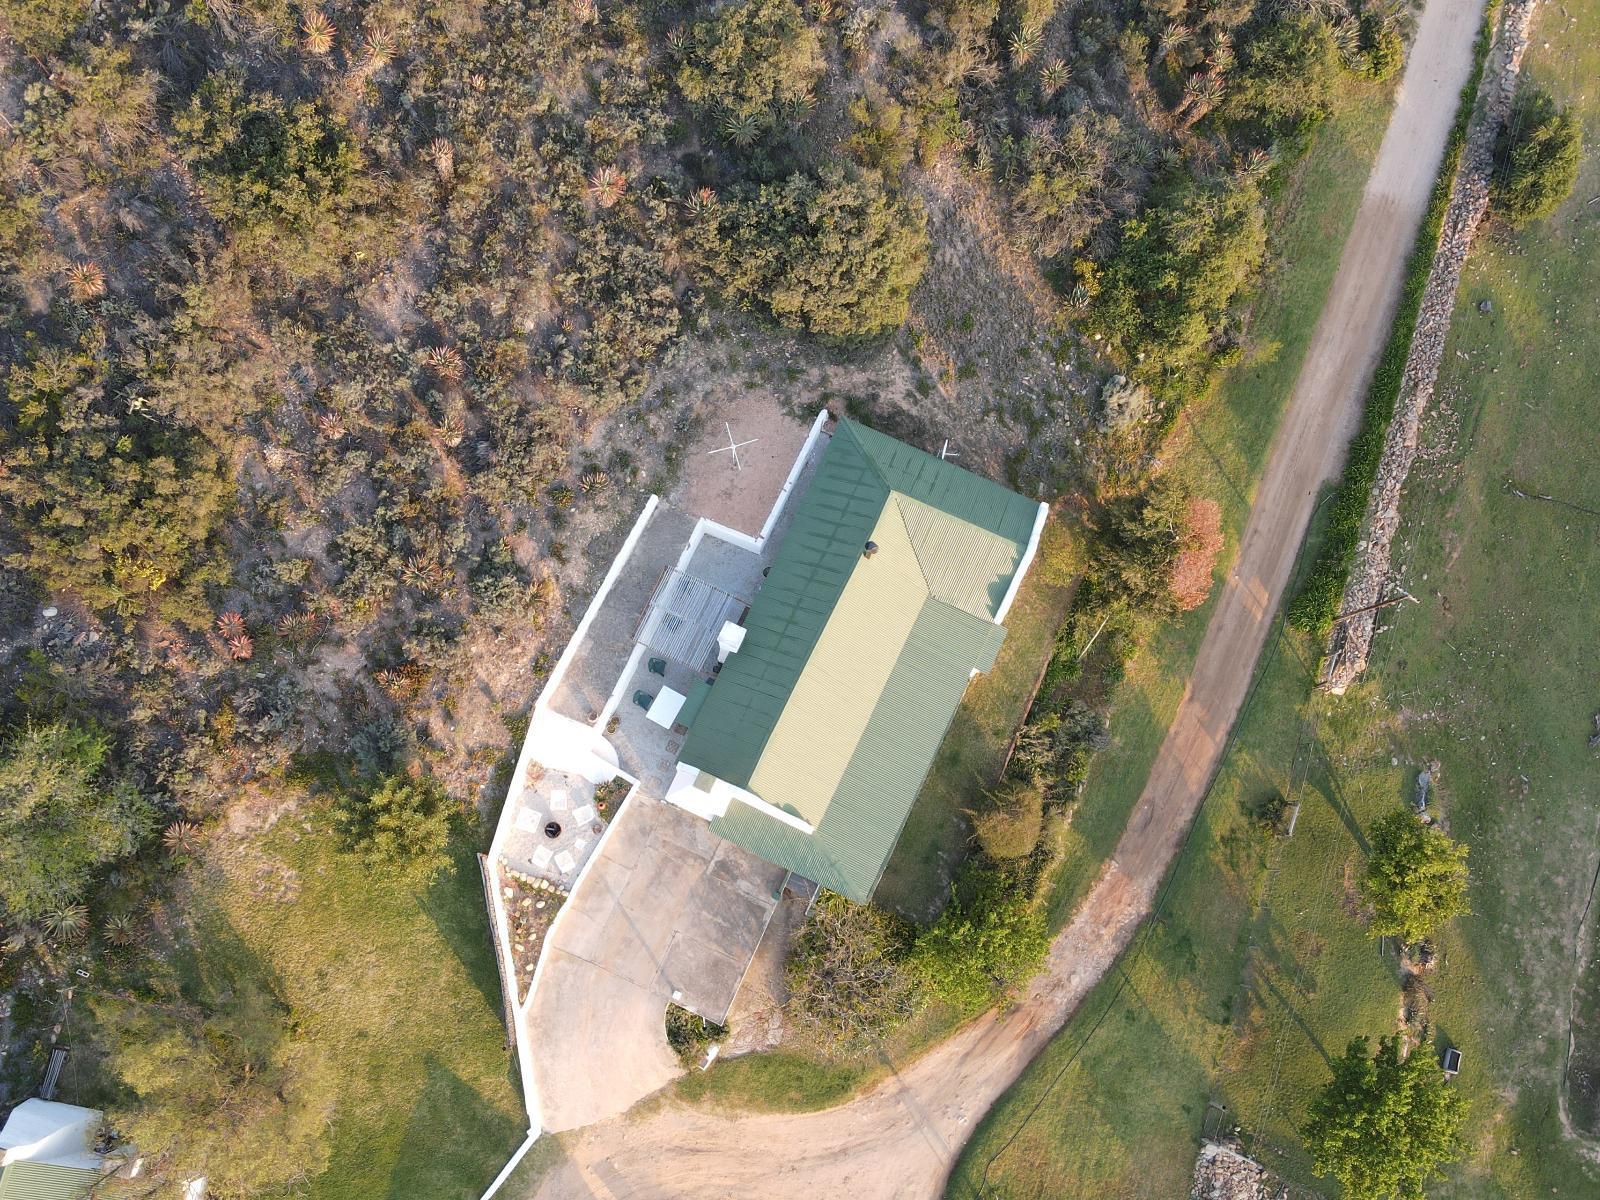 Bo Kouga Mountain Retreat Uniondale Western Cape South Africa Building, Architecture, Aerial Photography